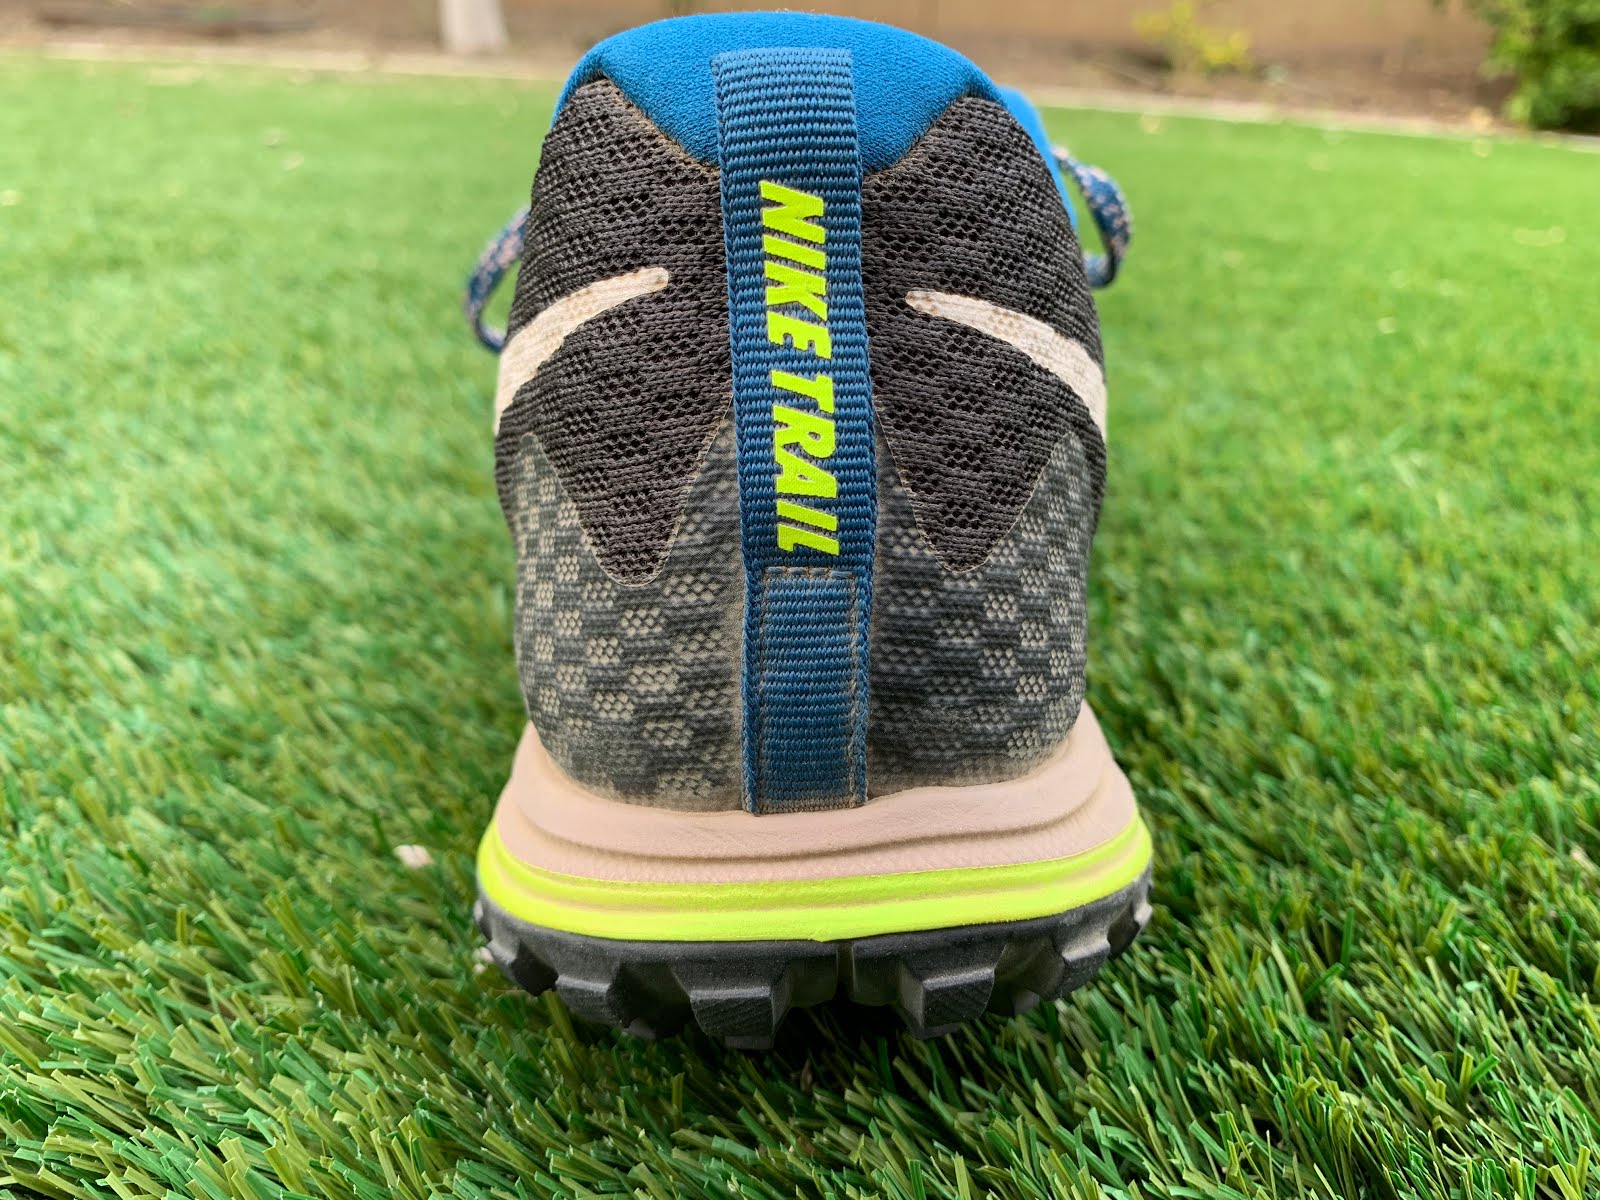 Road Trail Run: Nike Air Zoom 4 - Monster on the dirt, liability in the mud